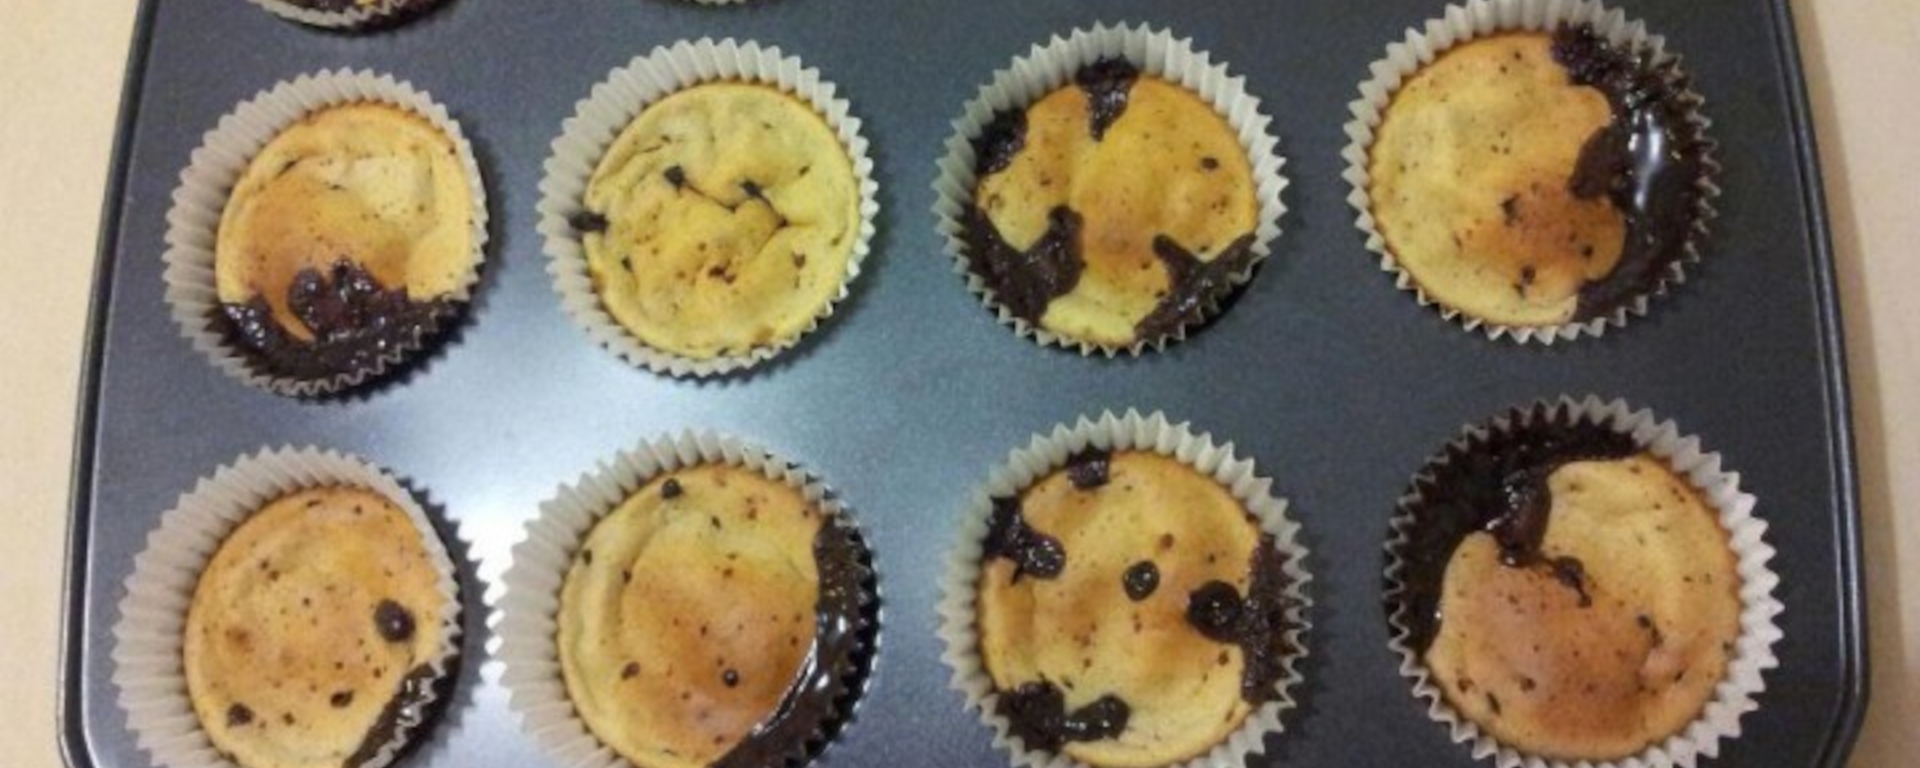 LuvMyRecipe.com - Banana Cupcakes with Choc Chip Pieces Featured